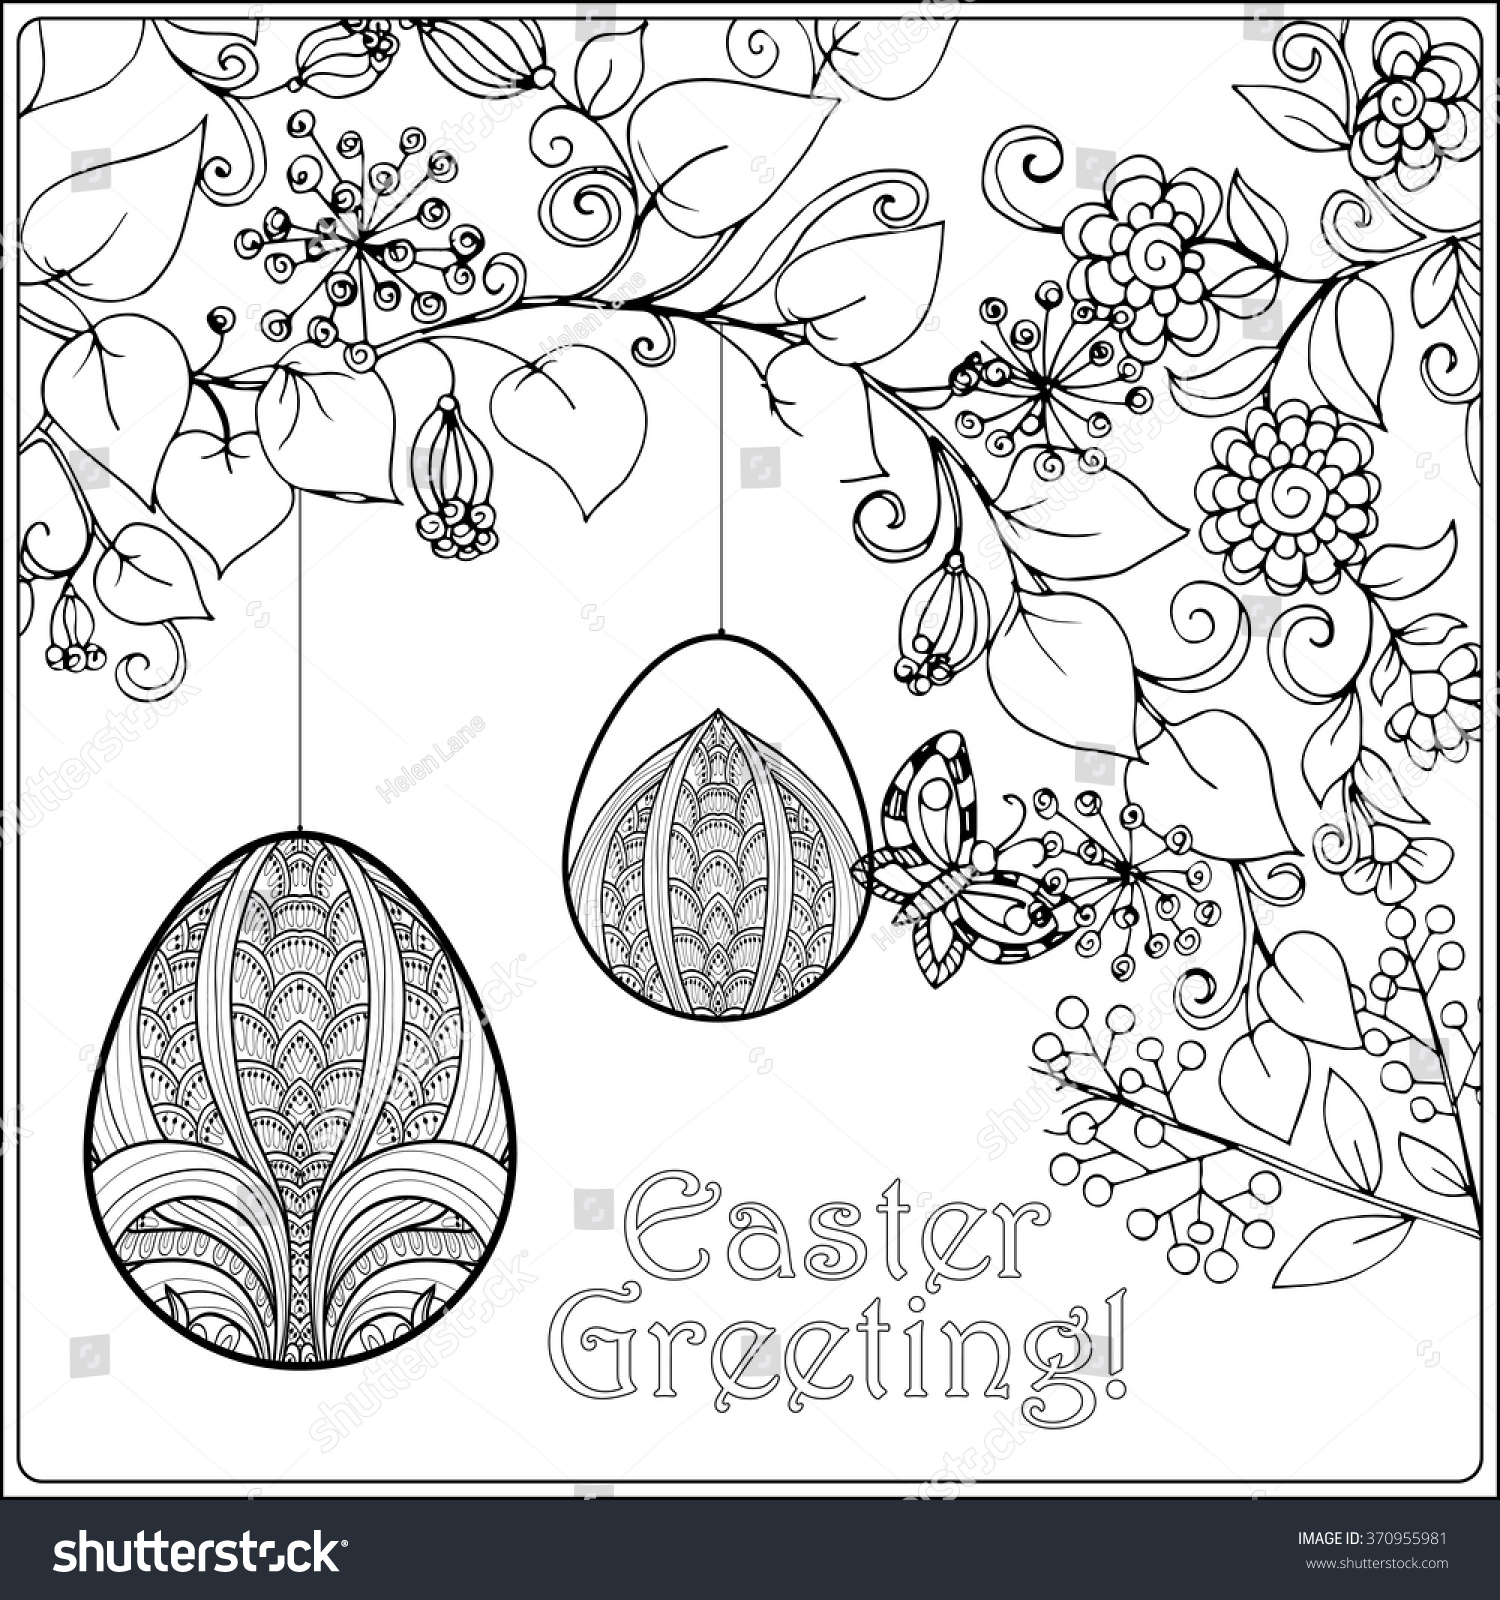 Decorative vintage flowers easter eggs coloring stock vector royalty free